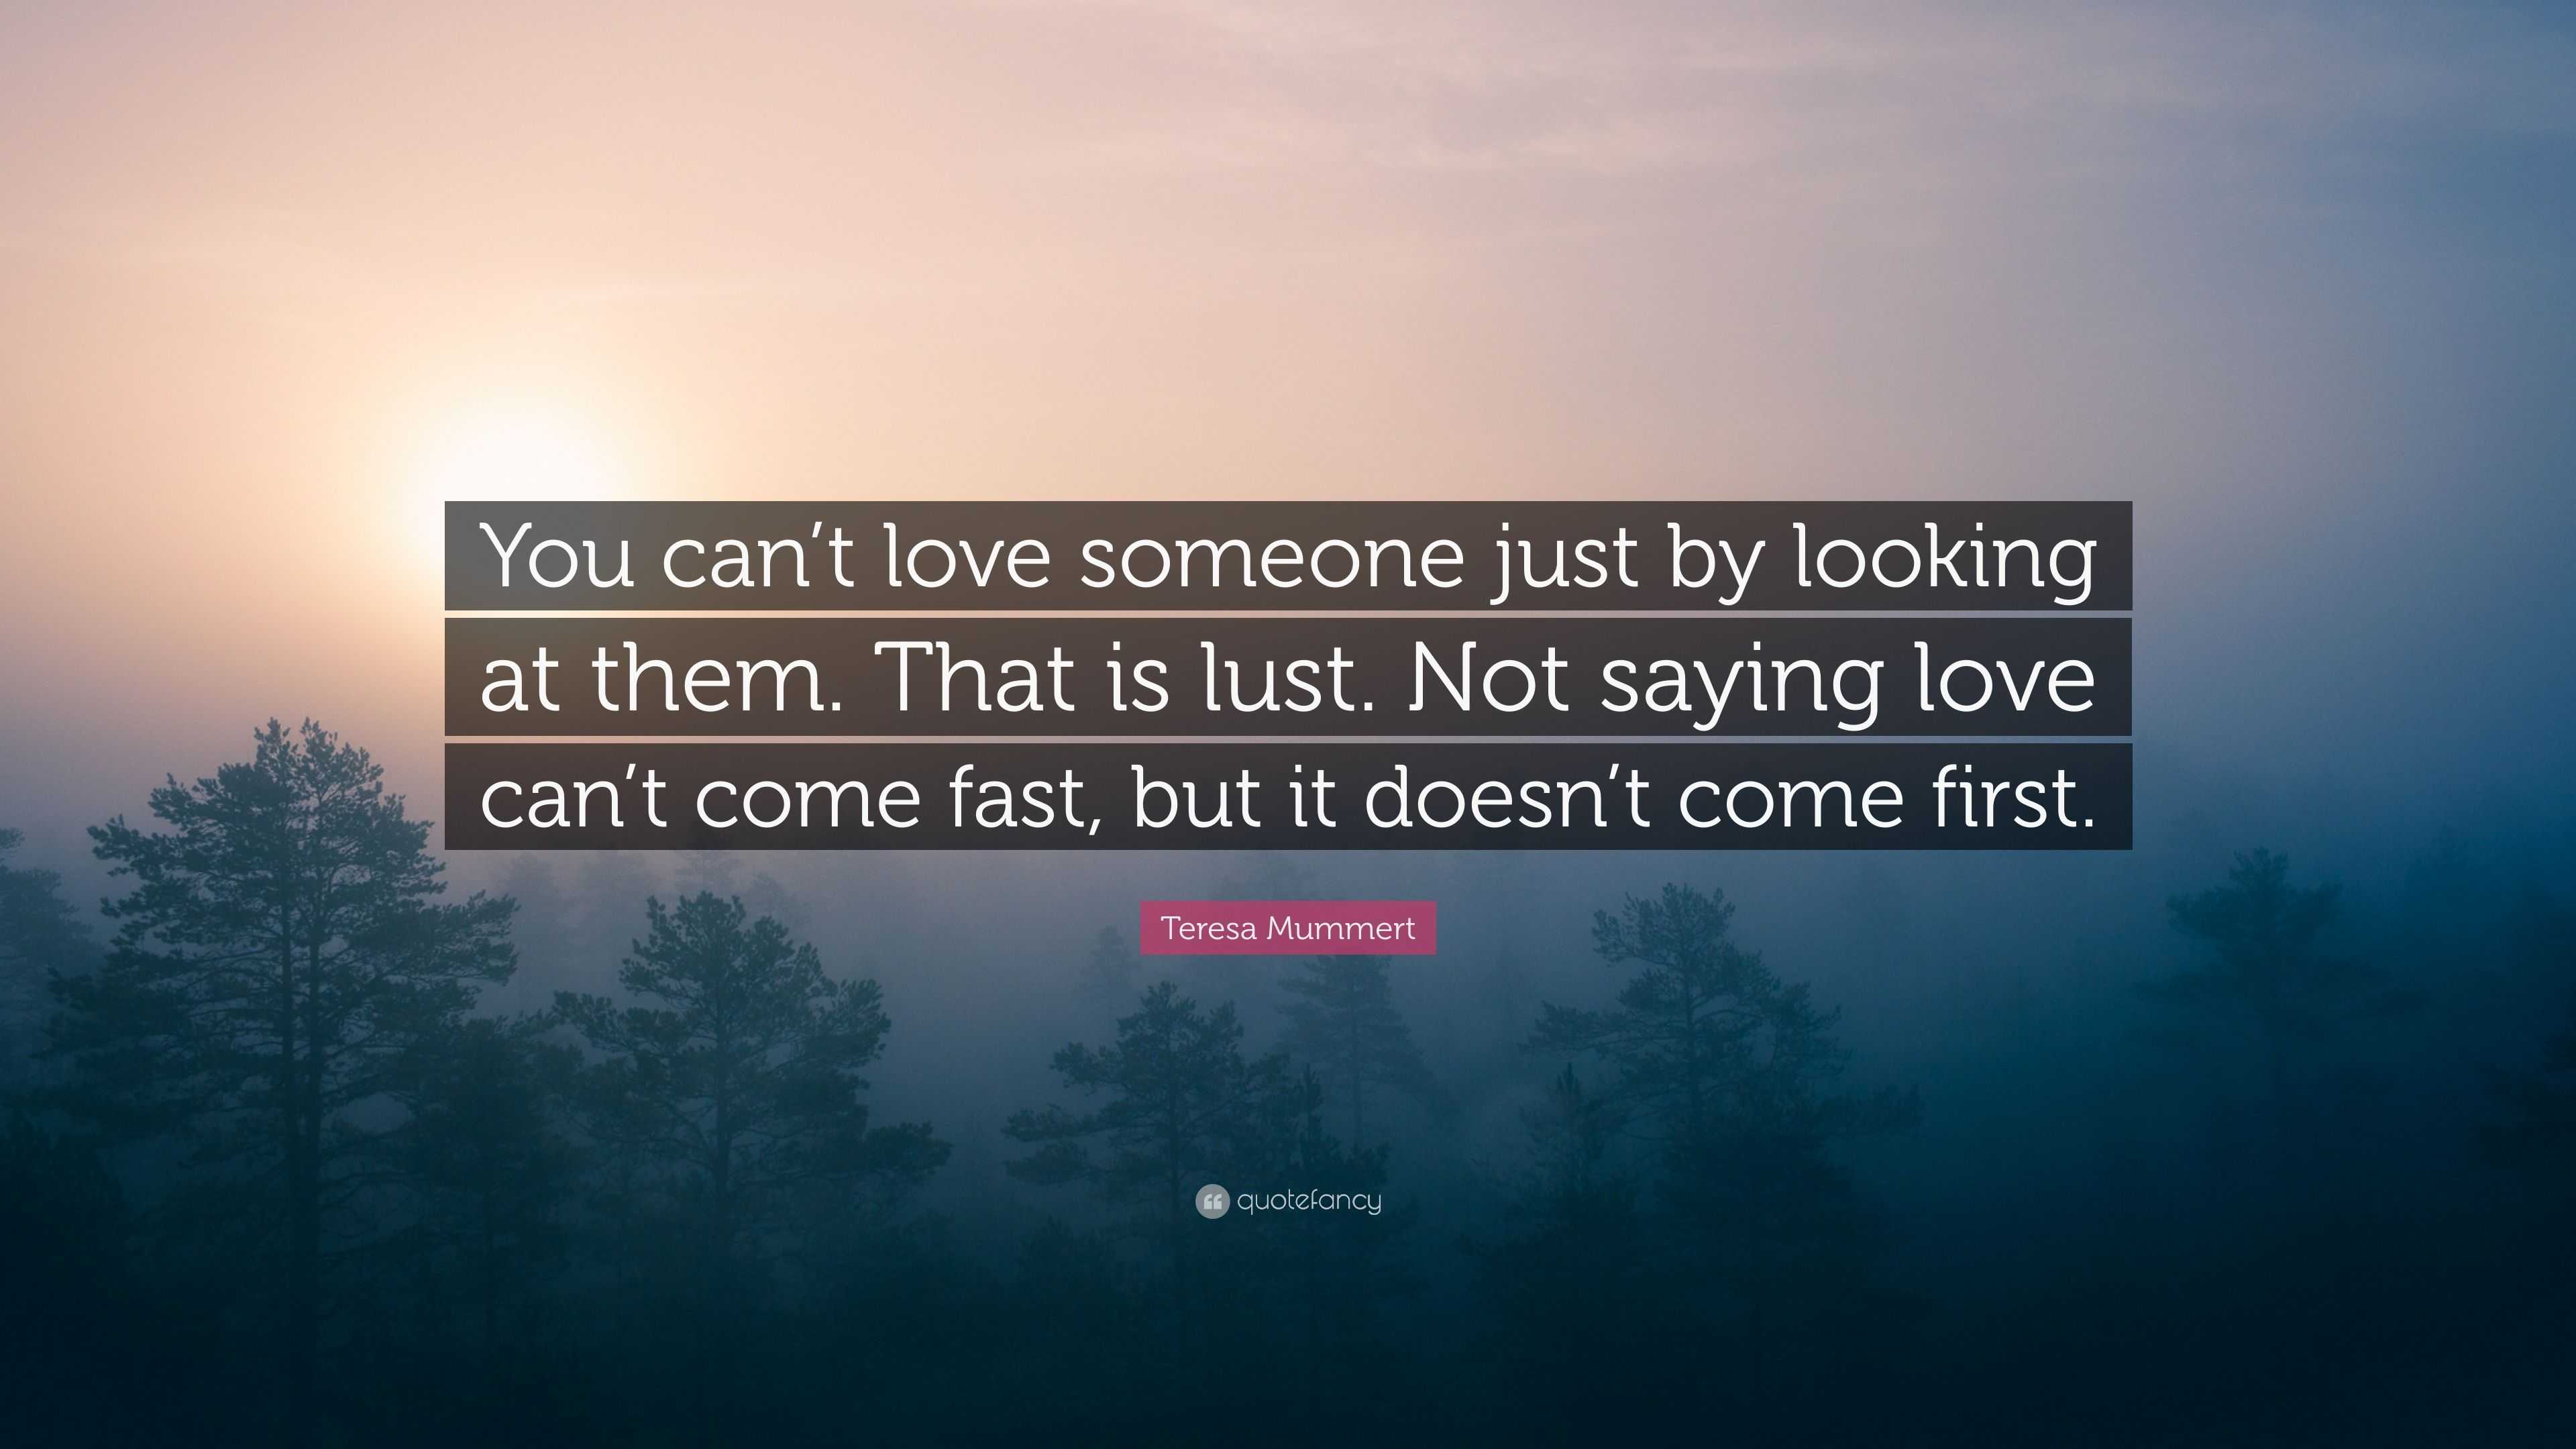 Teresa Mummert Quote “You can t love someone just by looking at them